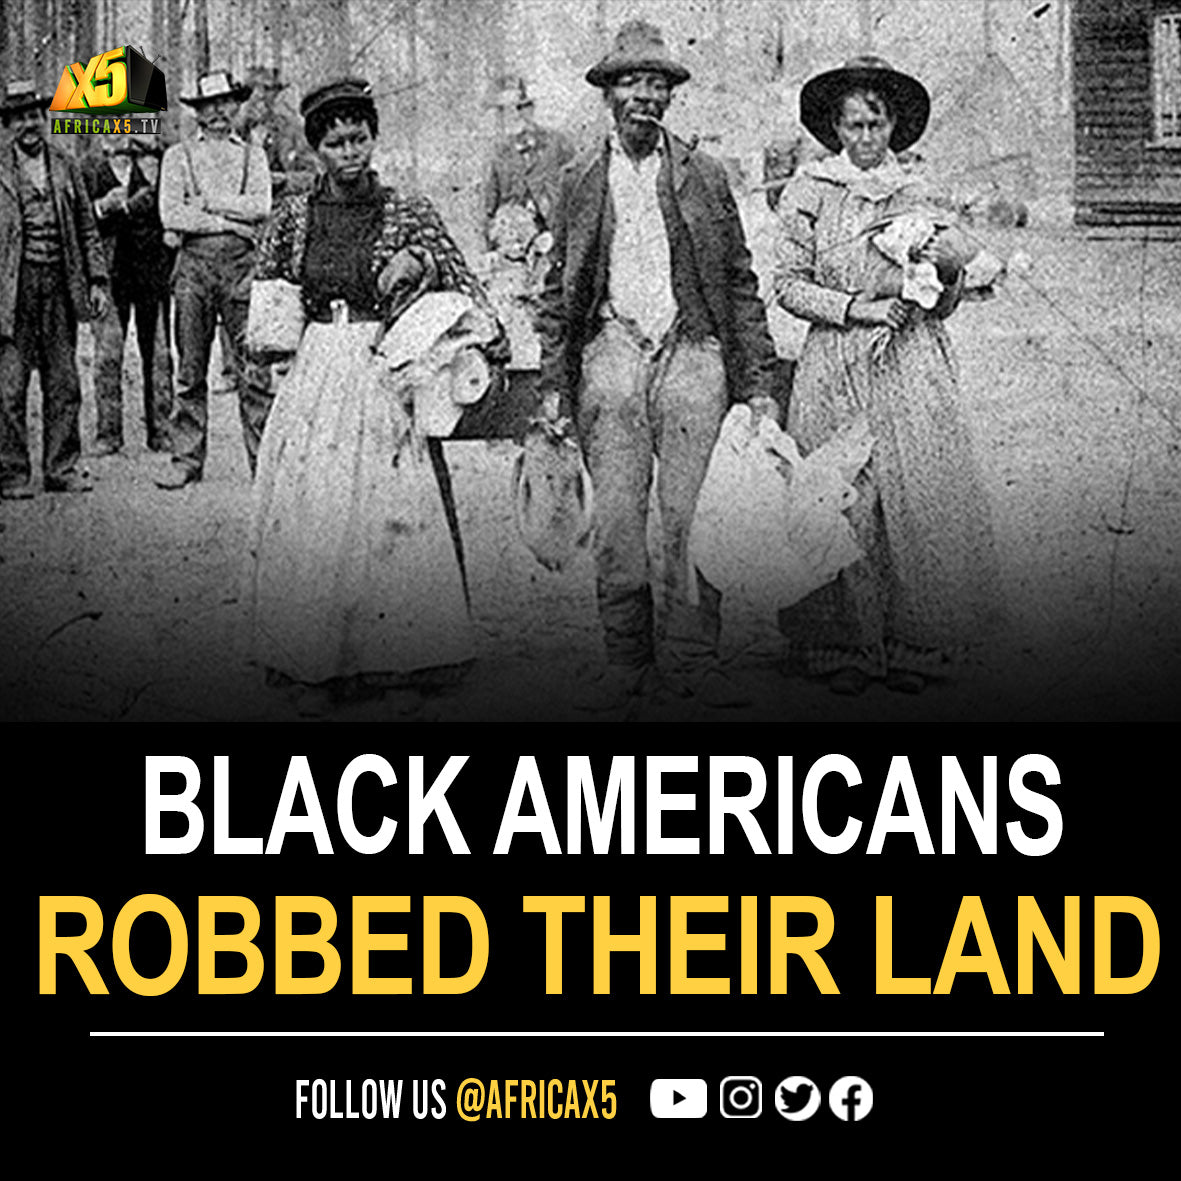 How Black Americans Were Robbed of Their Land